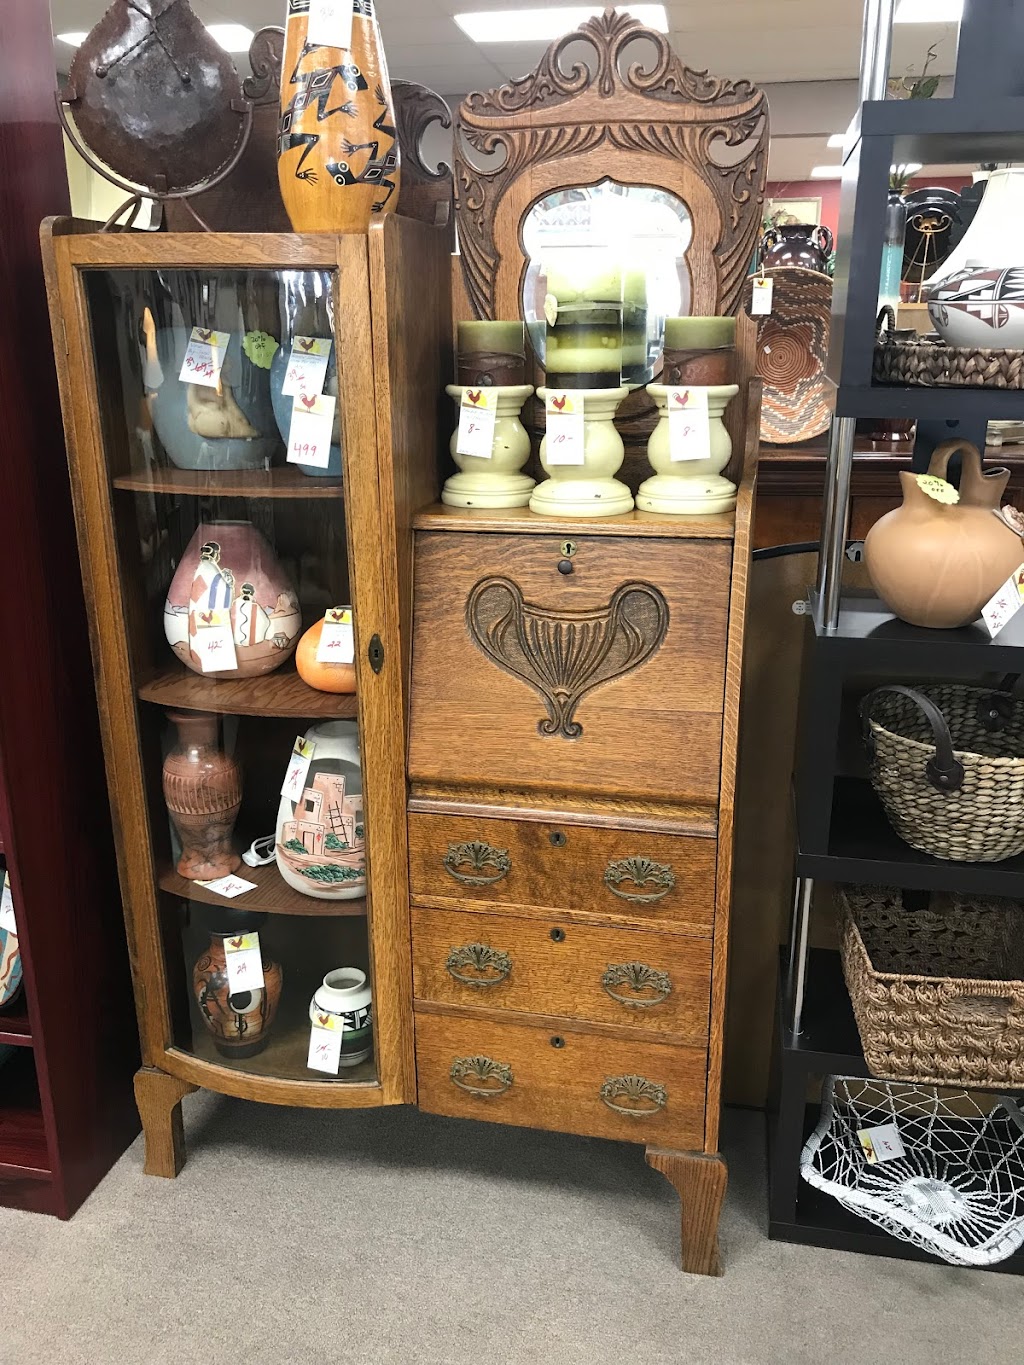 Red Rooster Consignment Furniture | Photo 2 of 10 | Address: 5959 E Southern Ave, Mesa, AZ 85206, USA | Phone: (480) 832-9404